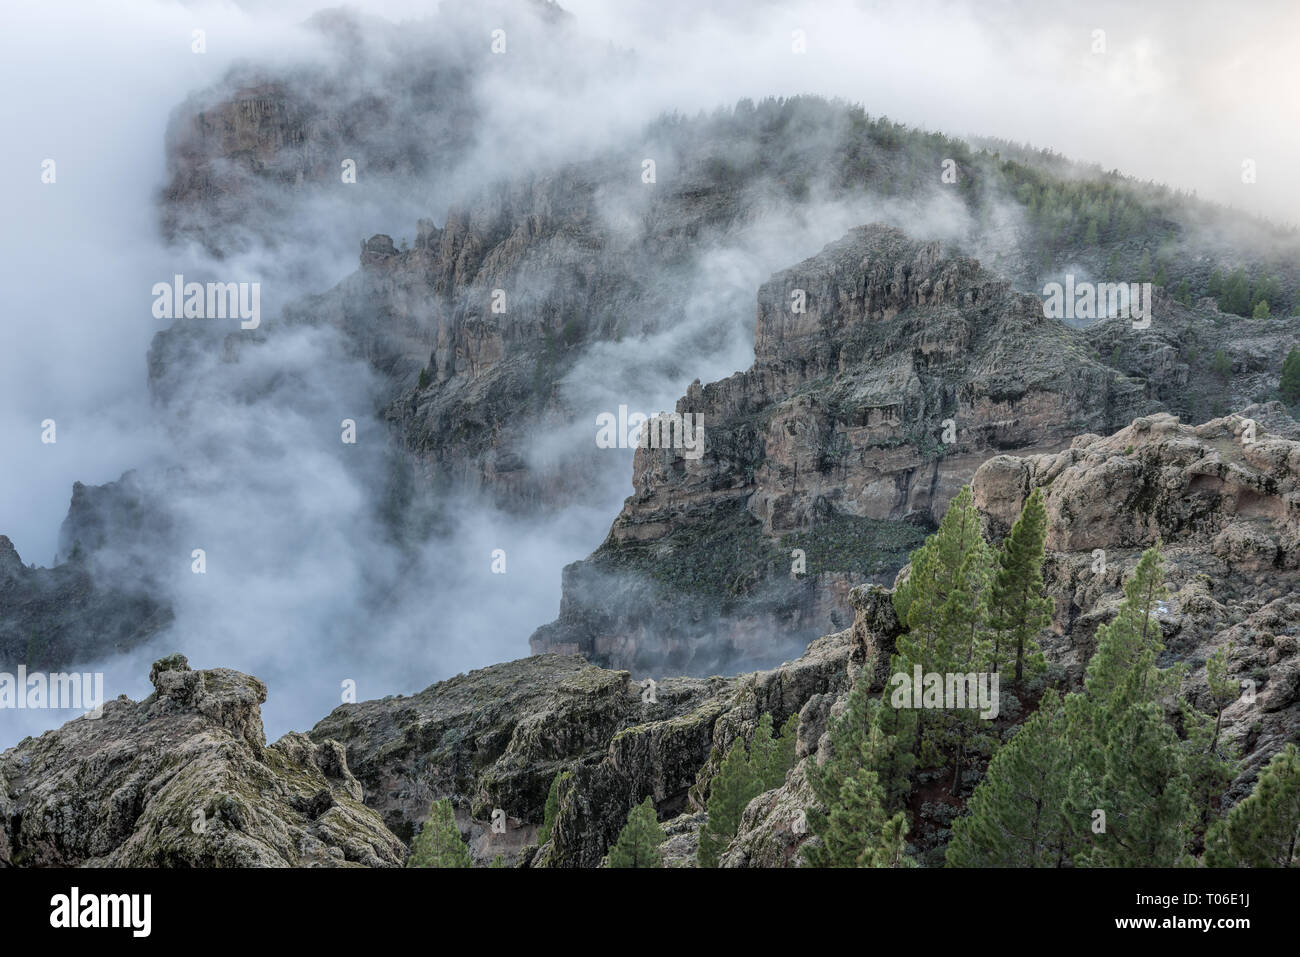 Misty mountain landscape view from eroded stone arch know as Ventana del nublo or La Agujereada. One of the higest places in Gran Canaria Island. Stock Photo